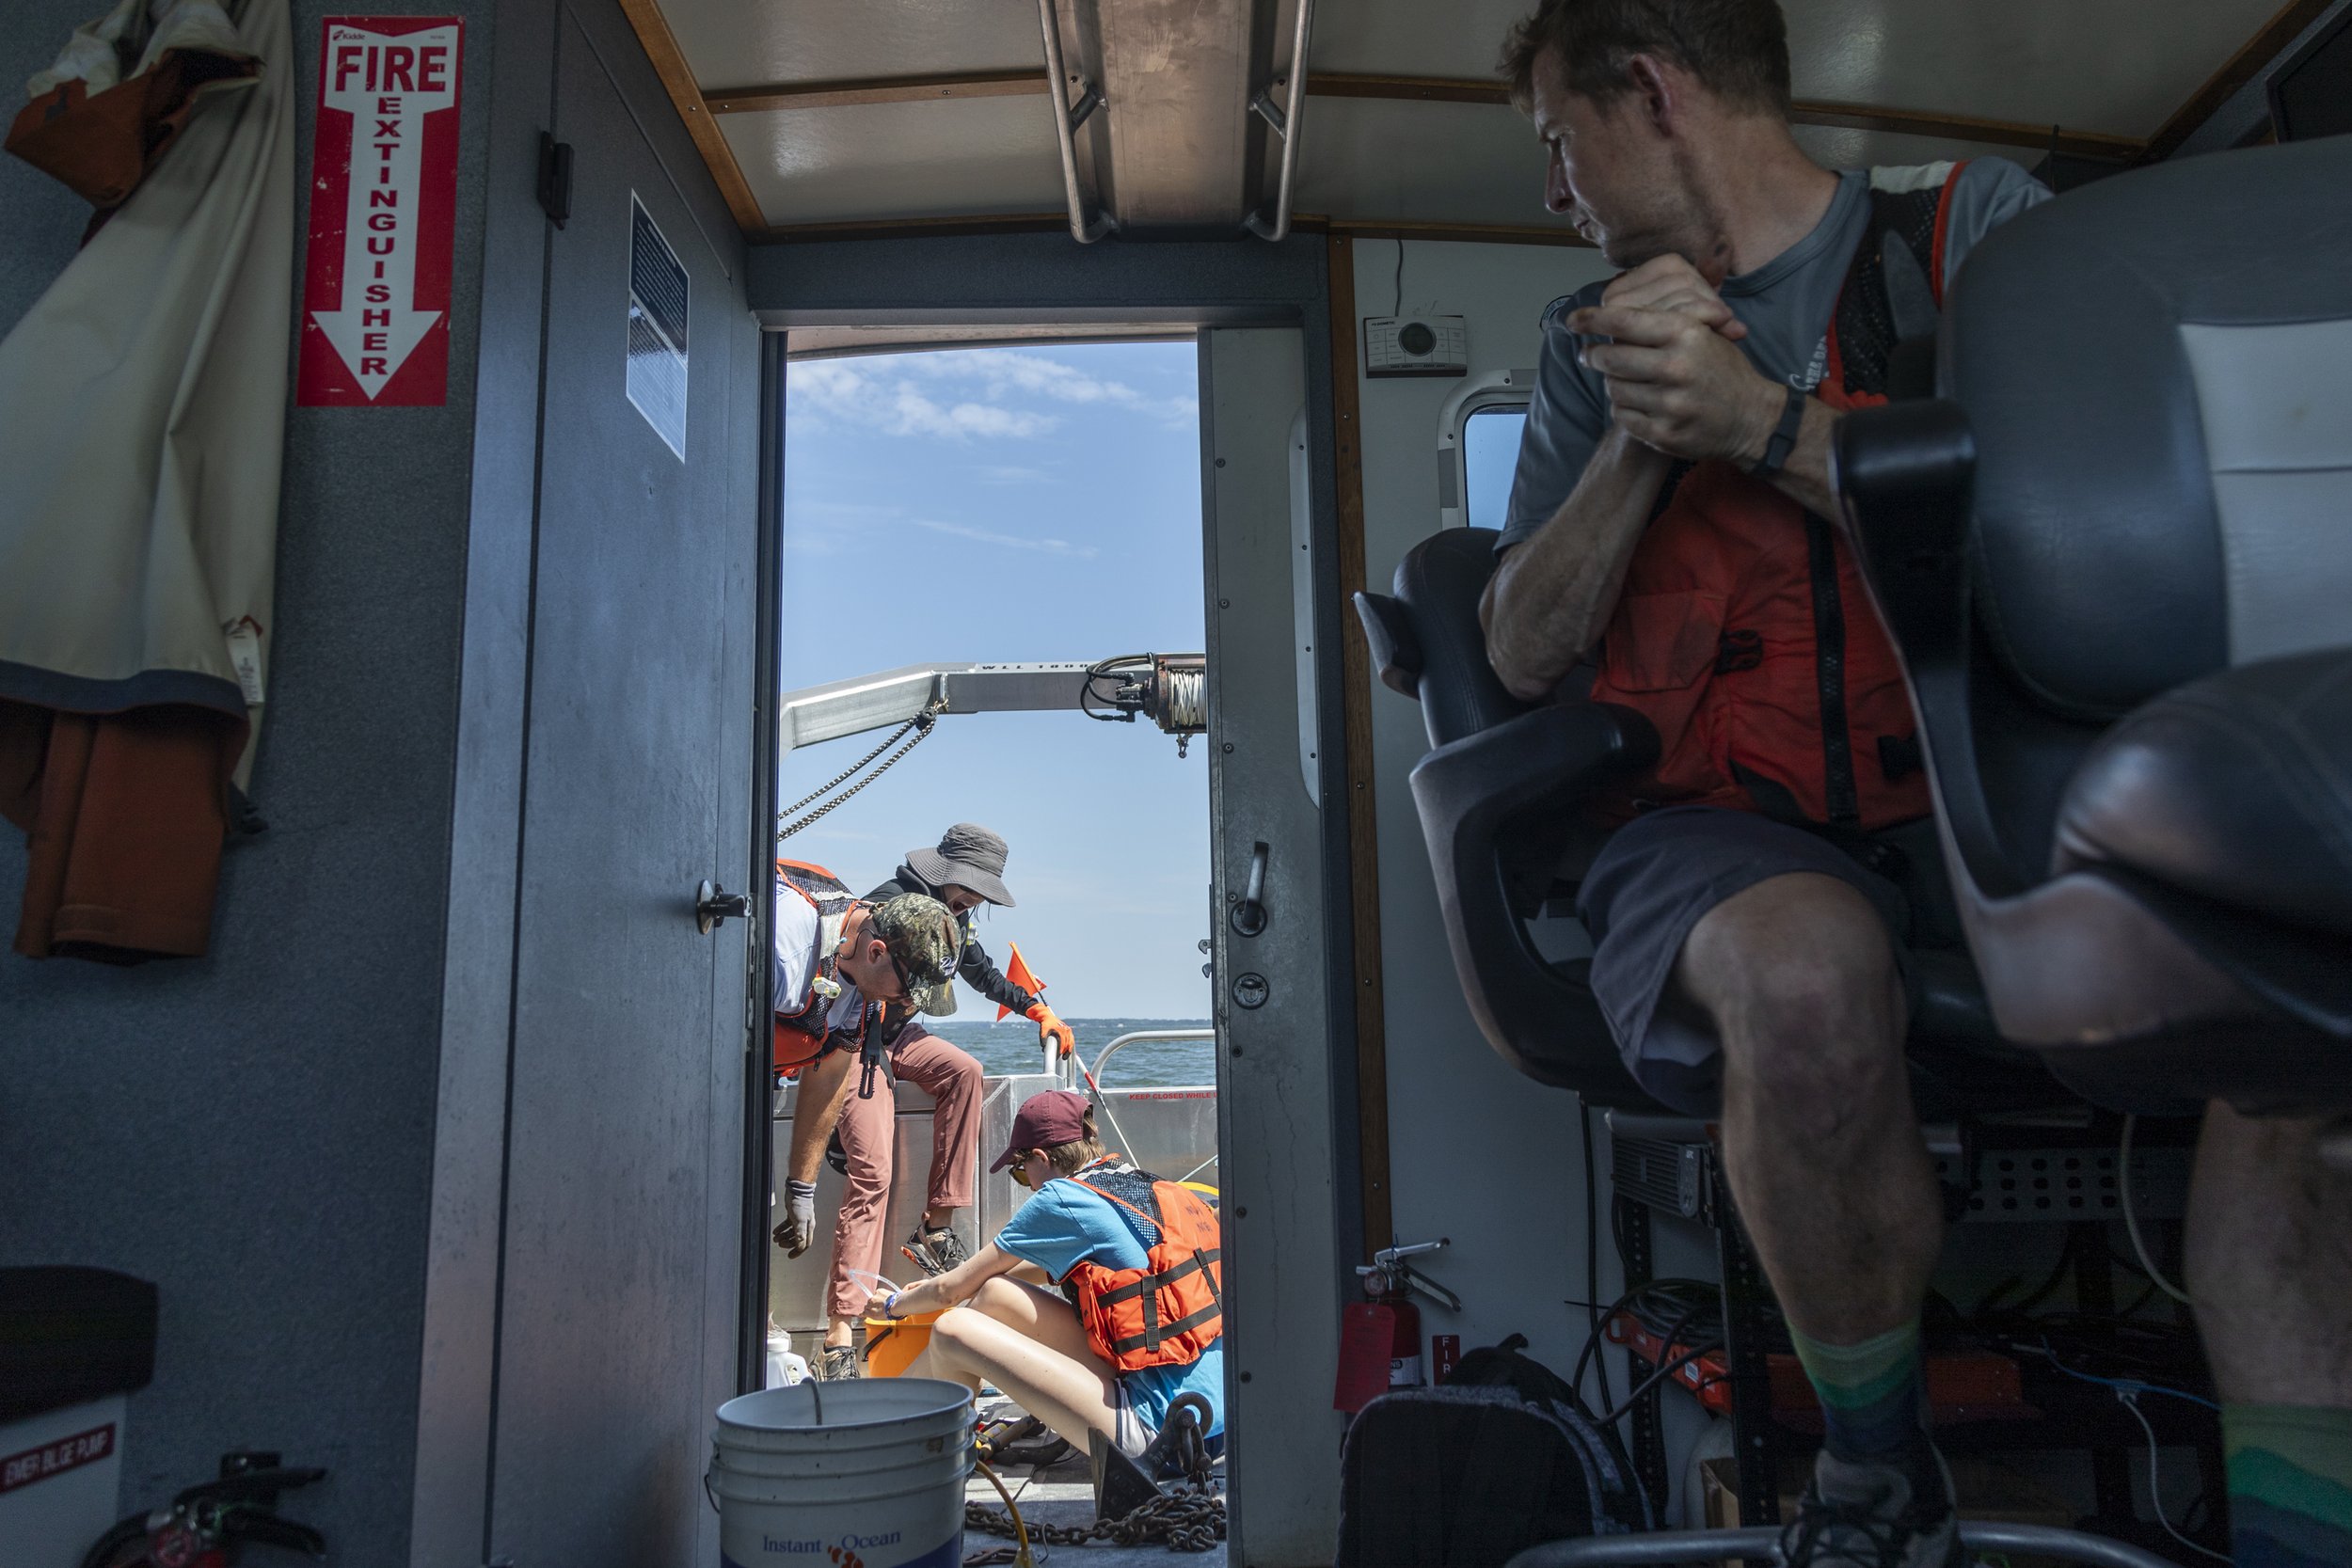  A team from the National Oceanic and Atmospheric Administration (NOAA), alongside interns, work to retrieve a hypoxia buoy that is connected to sensors along inductive wire at the mouth of the Choptank River near Talbot County, Md., on June 27, 2023